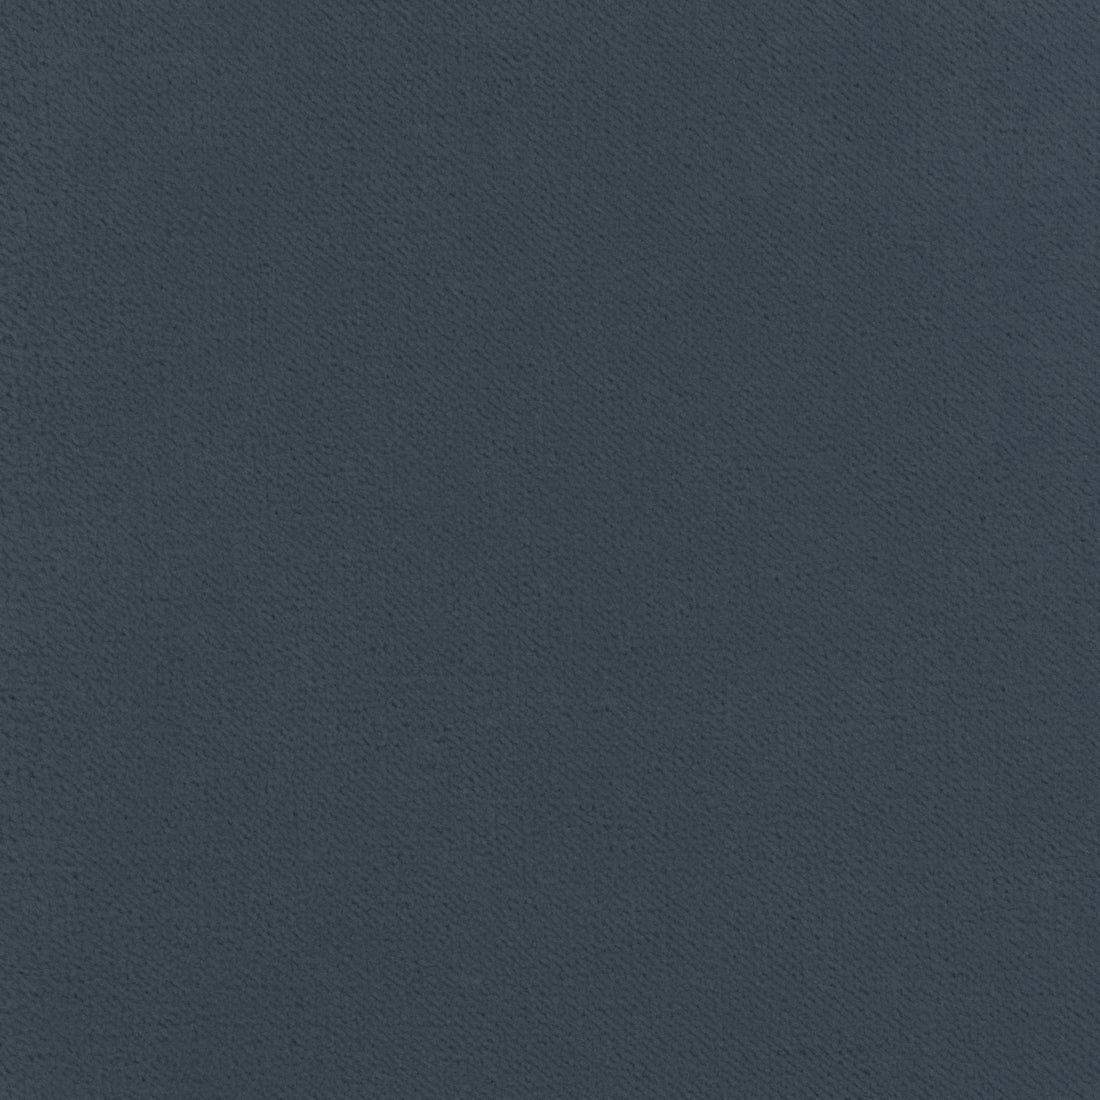 Club Velvet fabric in heron color - pattern number W7240 - by Thibaut in the Club Velvet collection